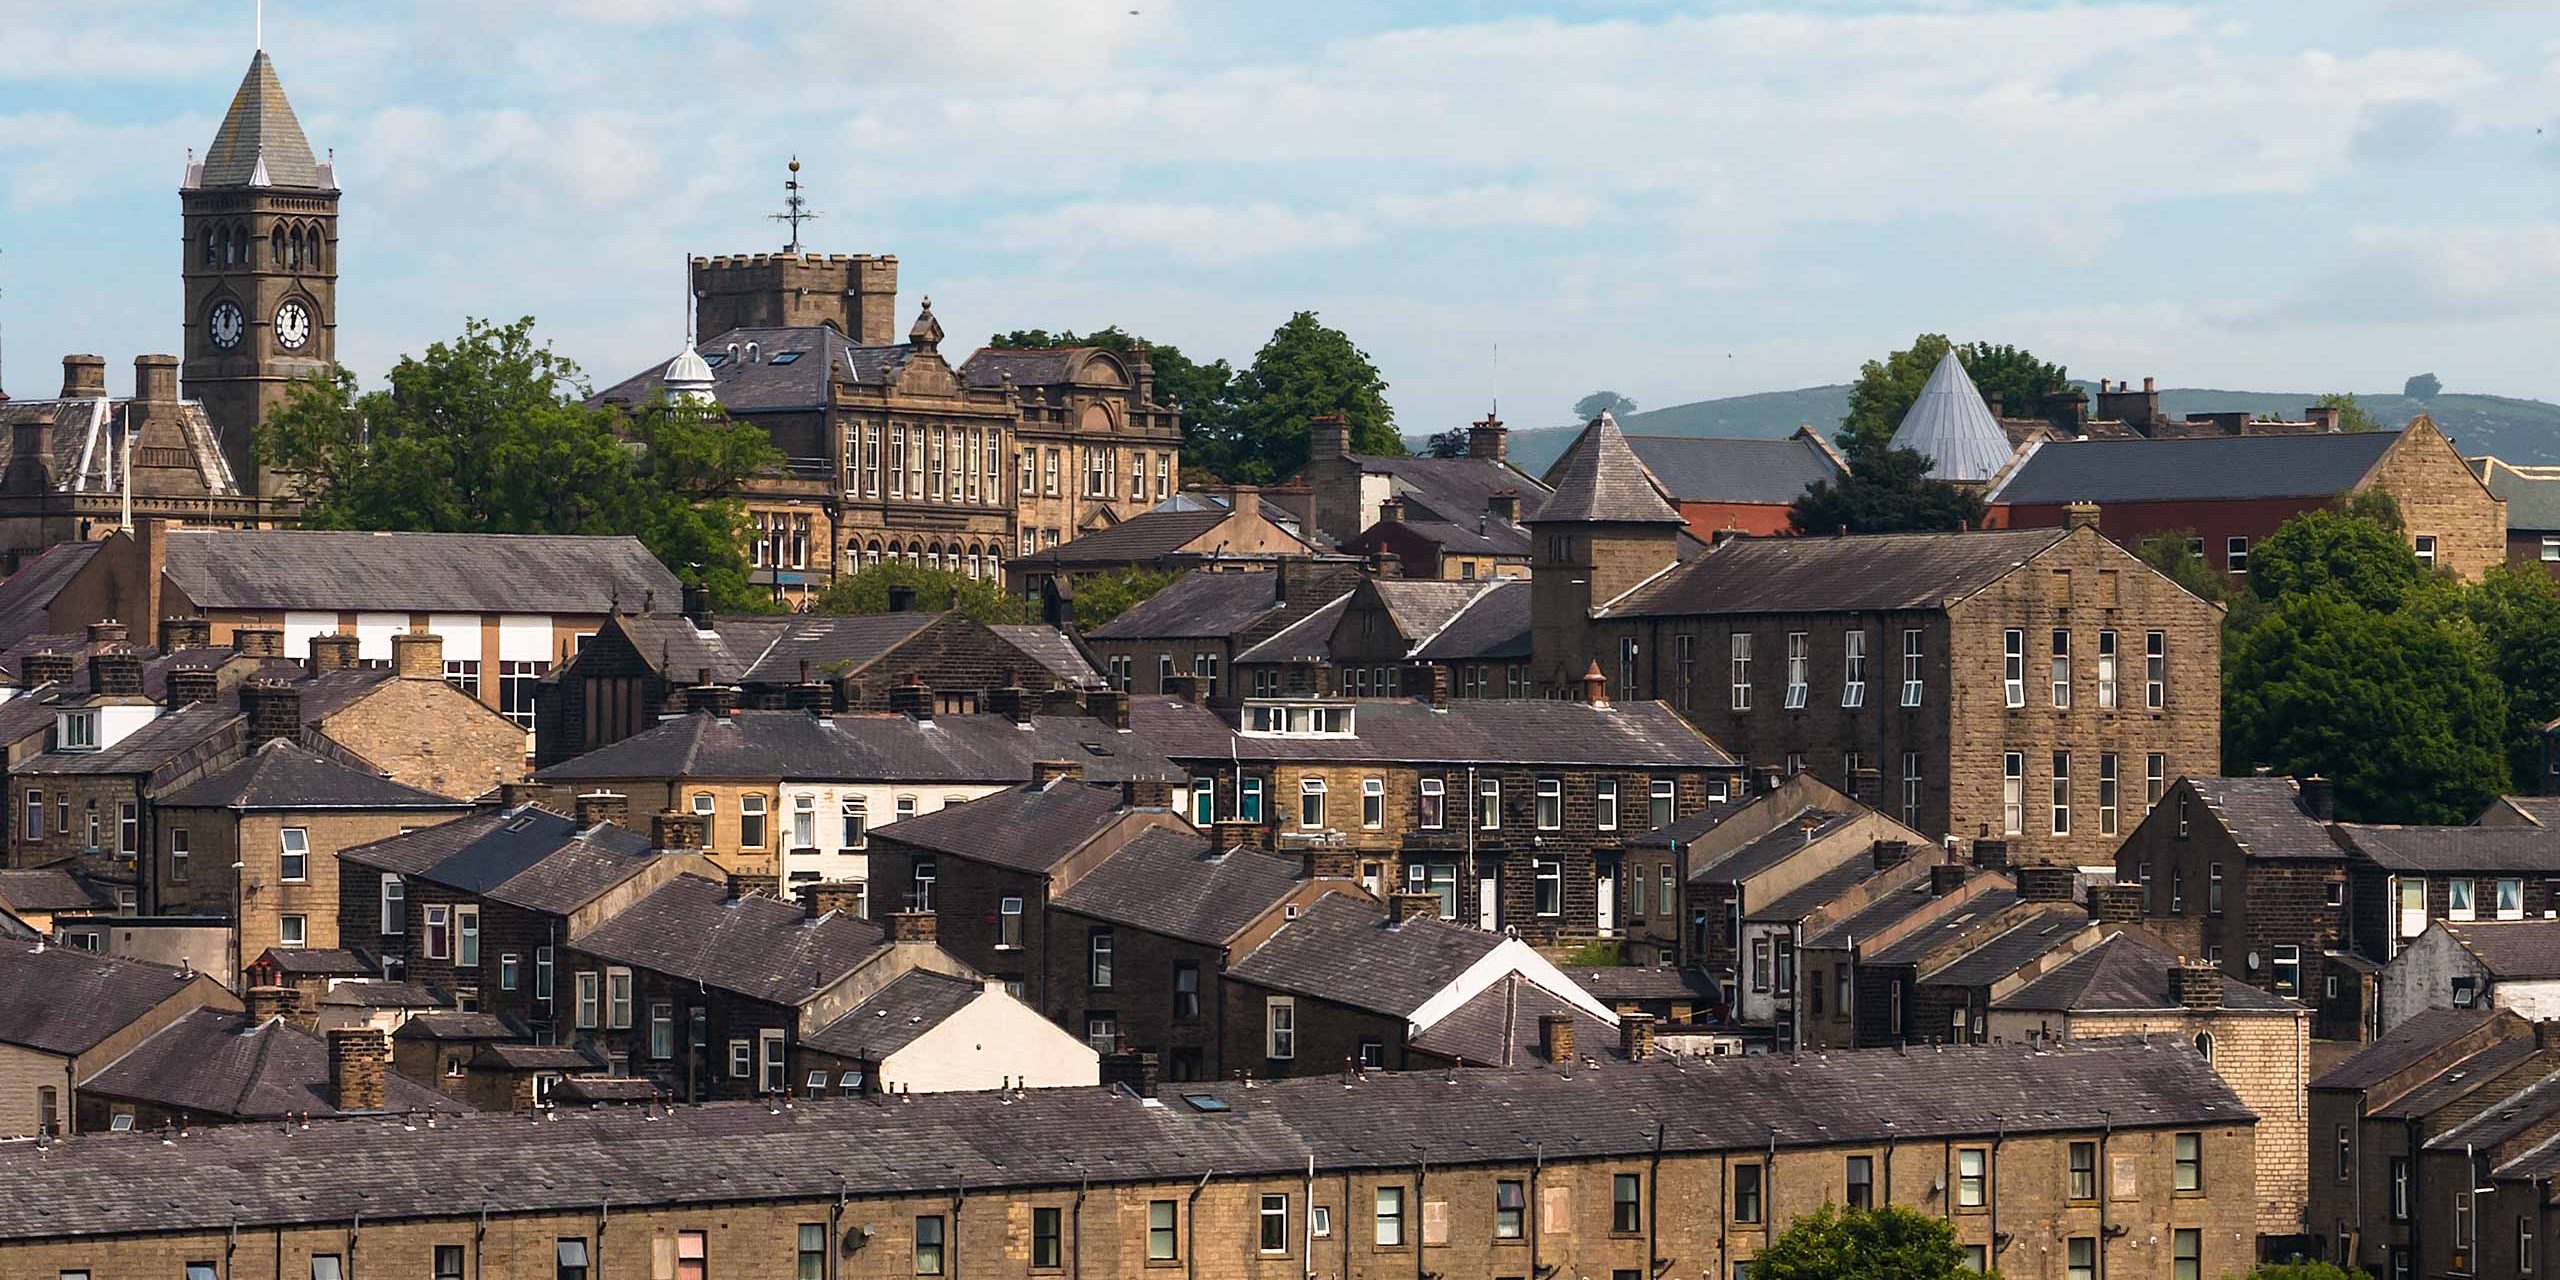 photo of the view across the rooftops of colne